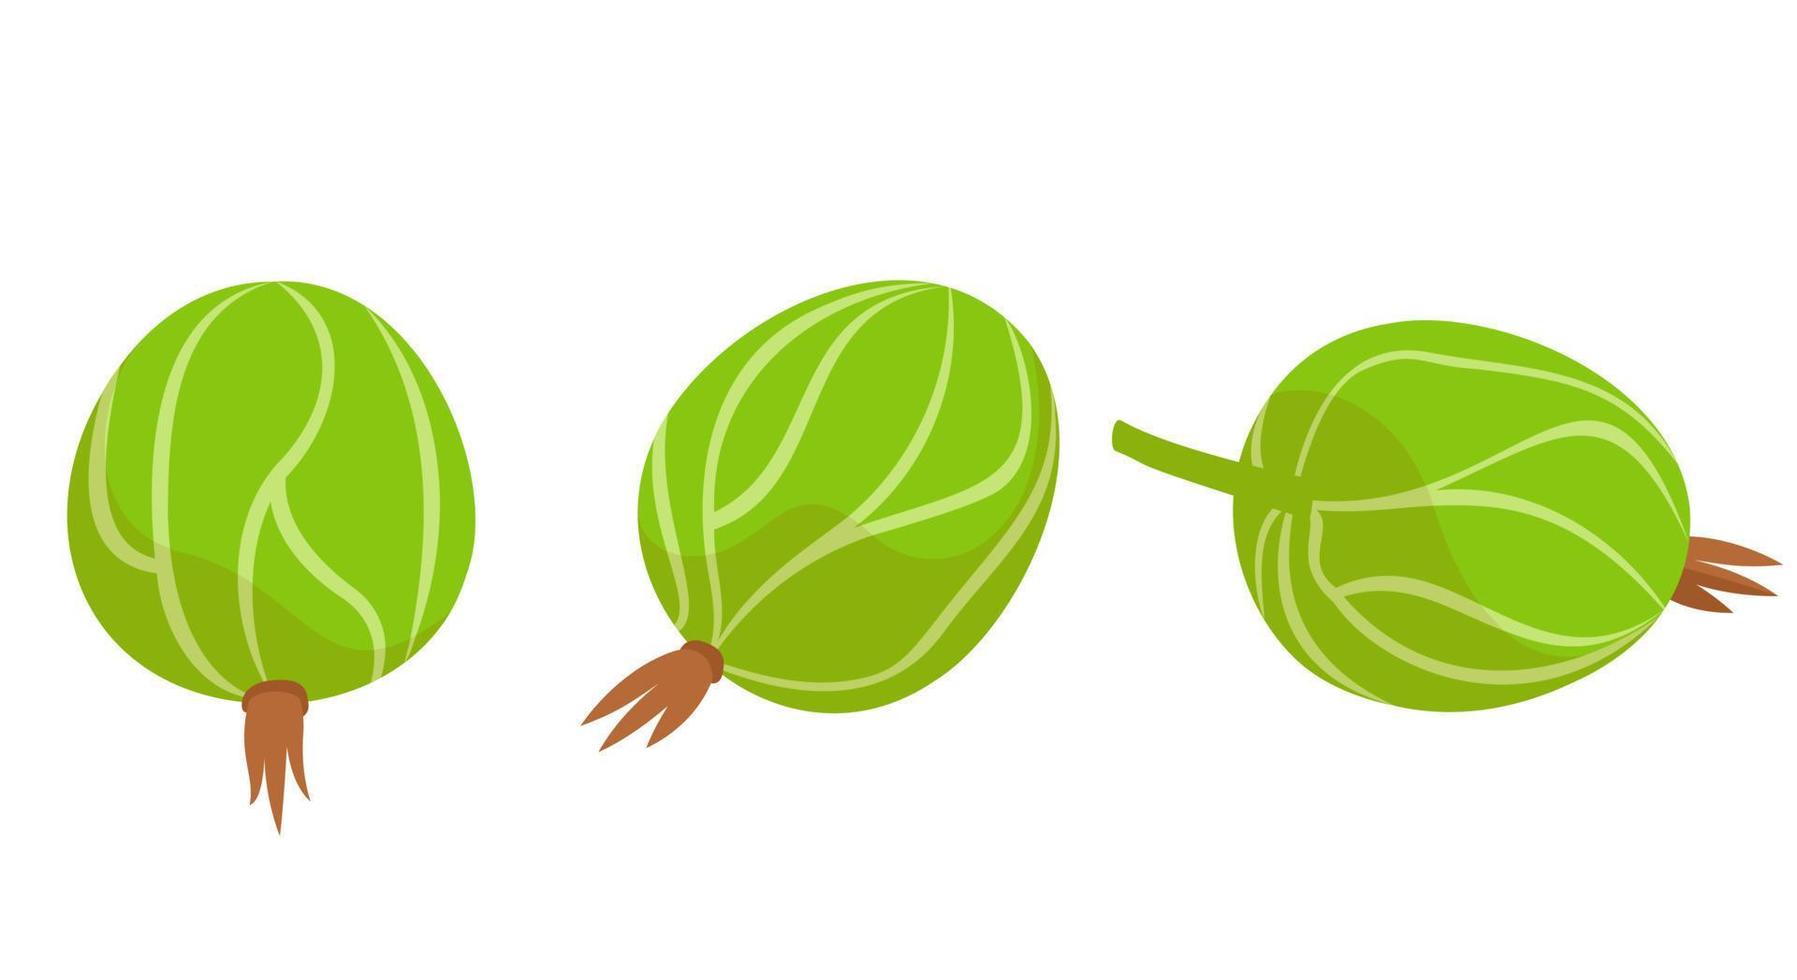 Gooseberry in different angles. vector